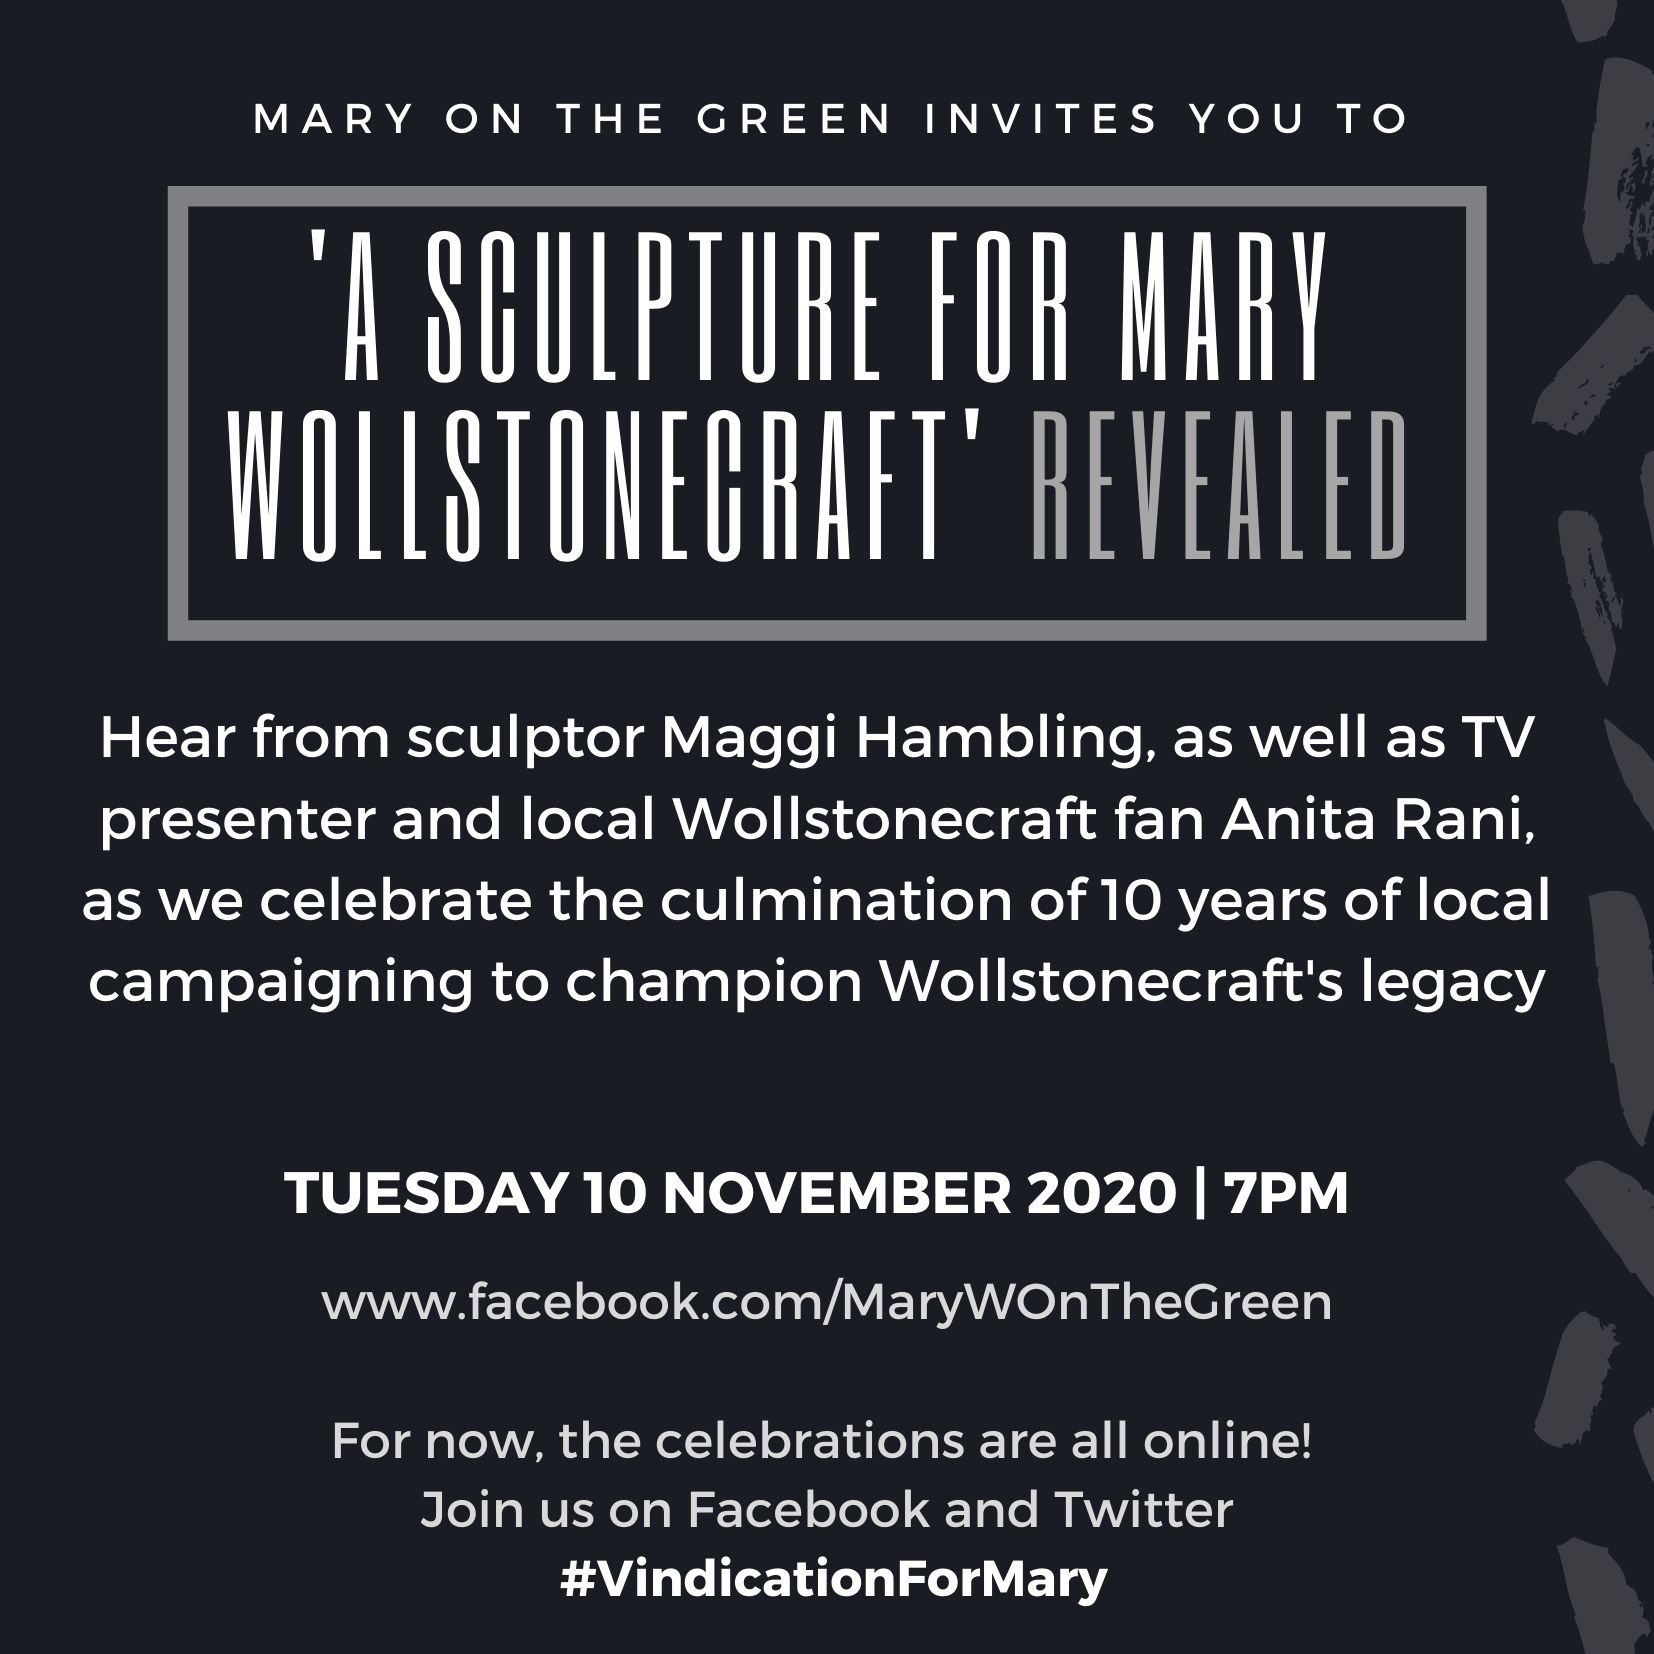 A Sculpture for Mary Wollstonecraft  El6-2DqX0AARD_q?format=jpg&name=large